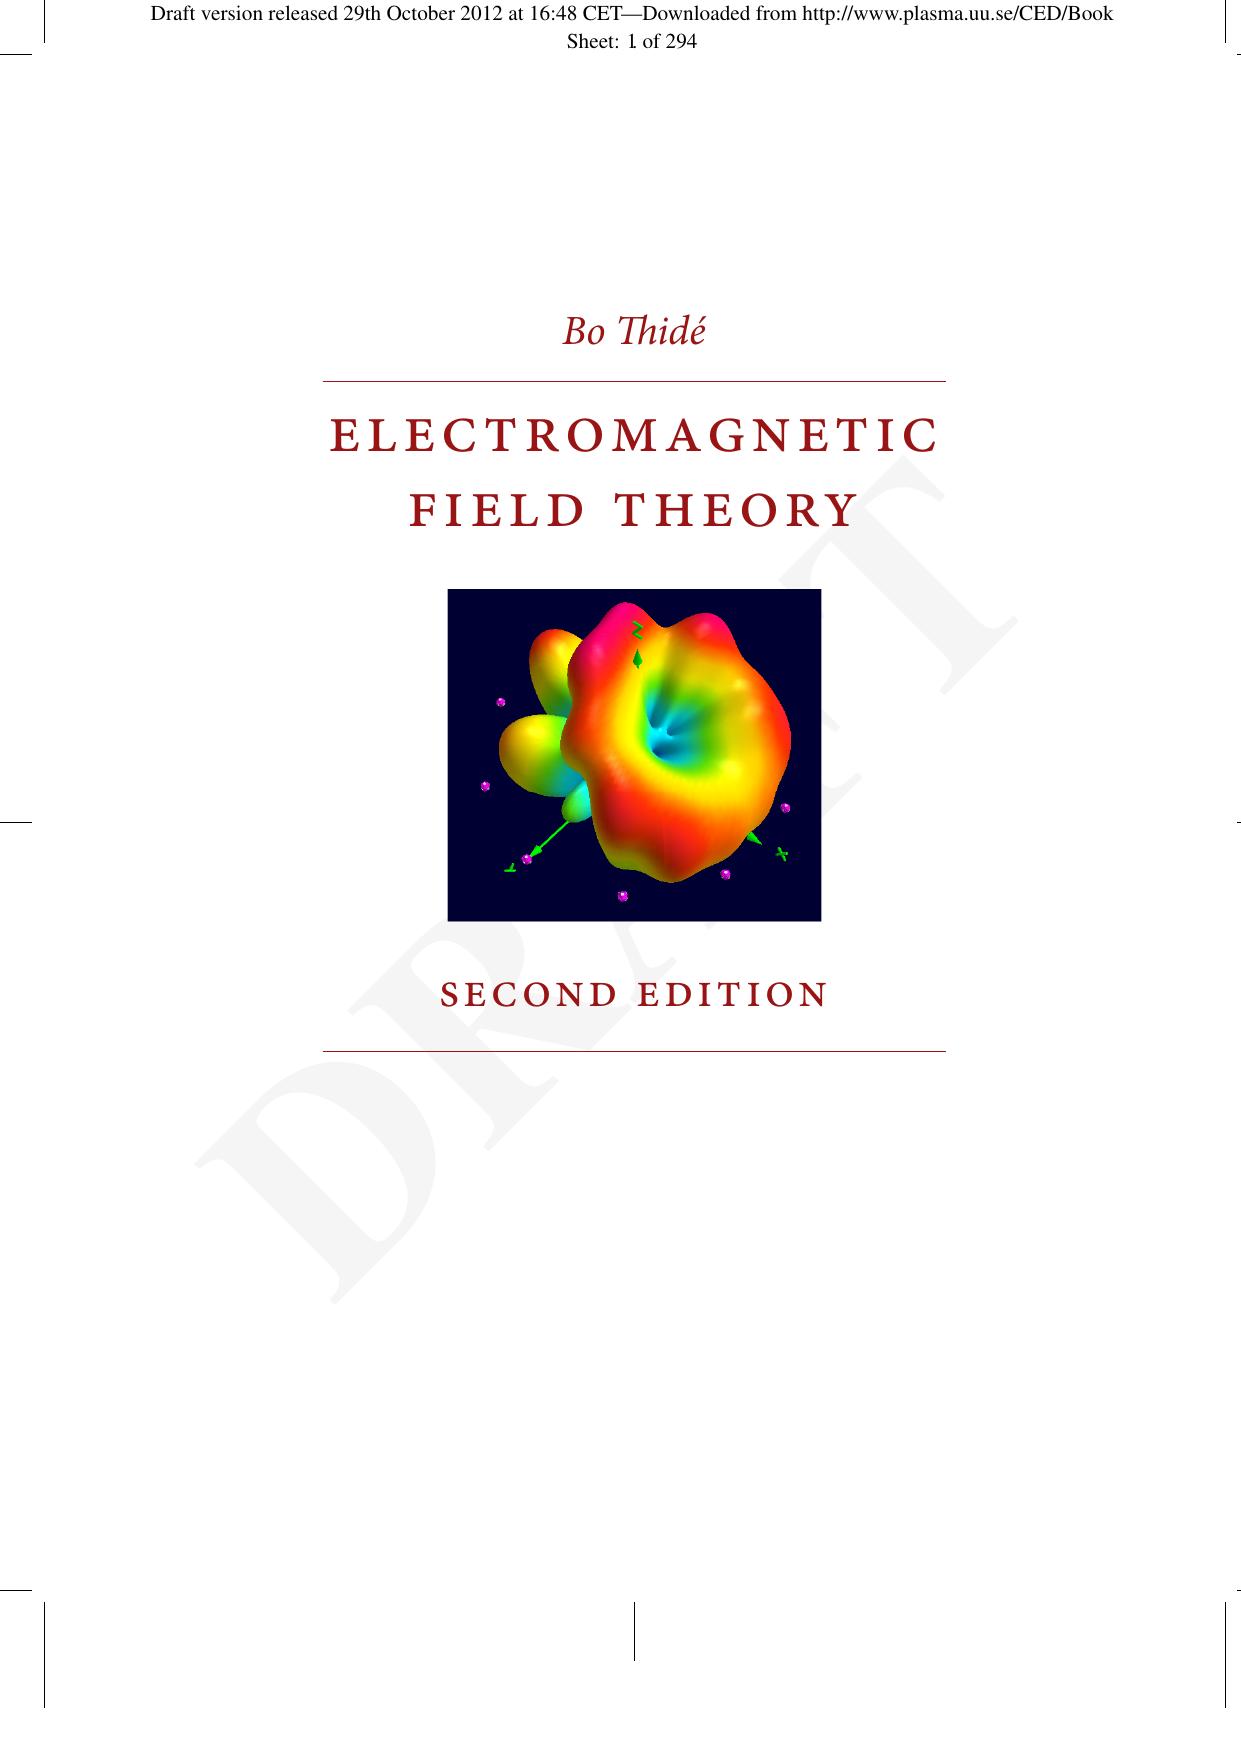 ELECTROMAGNETIC FIELD THEORY 2nd ed. 2012.pdf